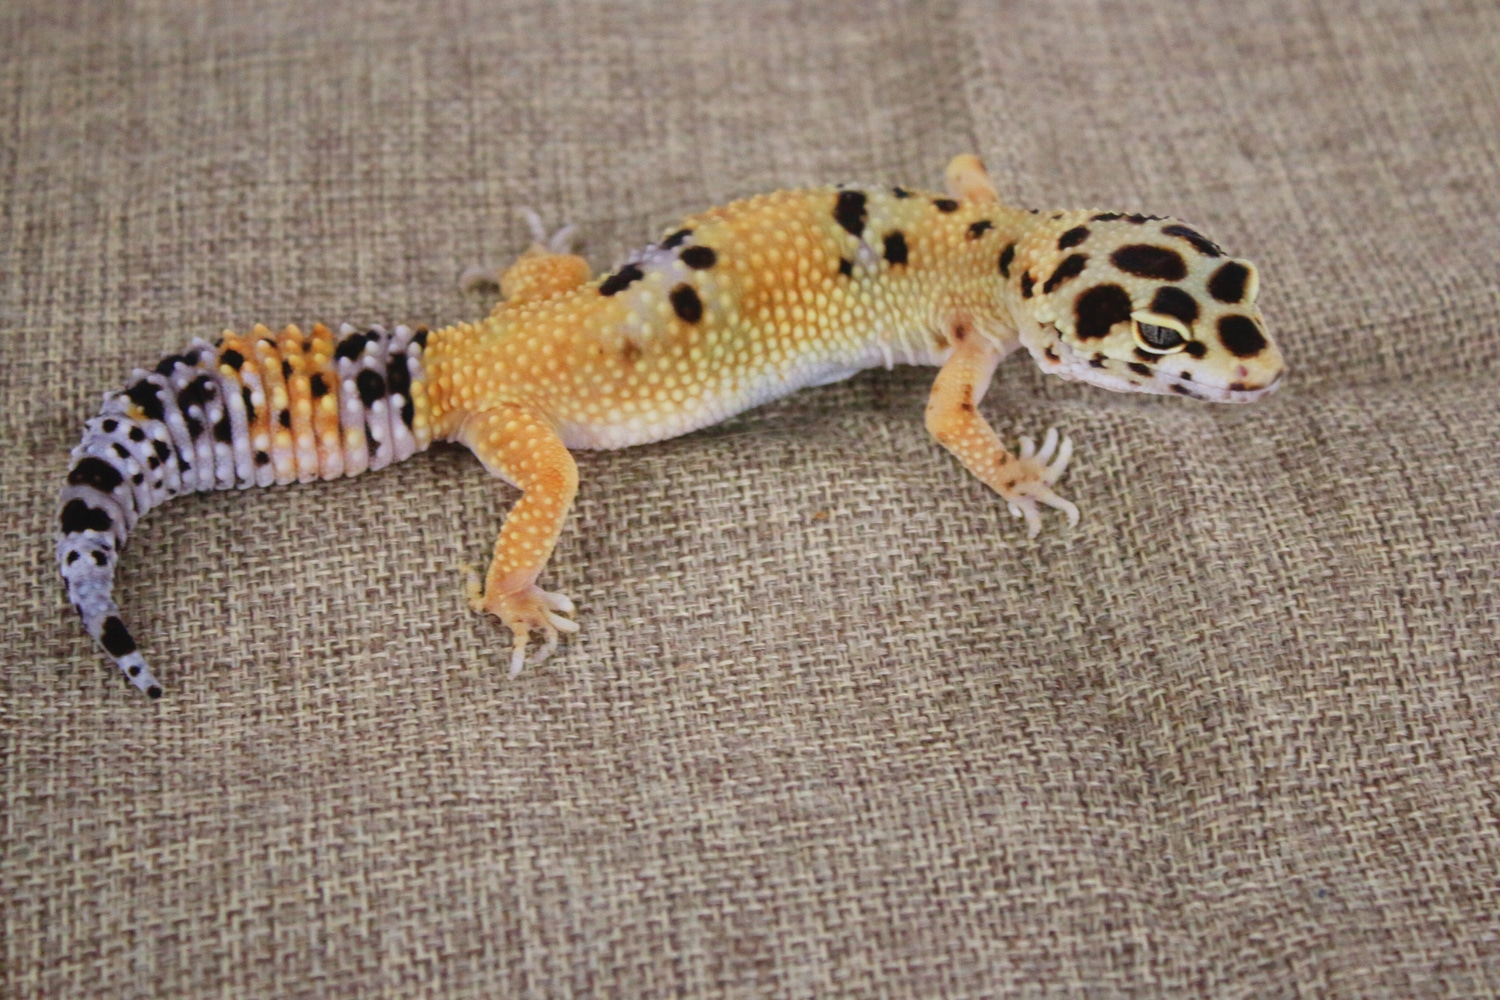 Pacific Green Cross Ph Tremper — Adult Female Leopard Gecko by Oklana Zoological